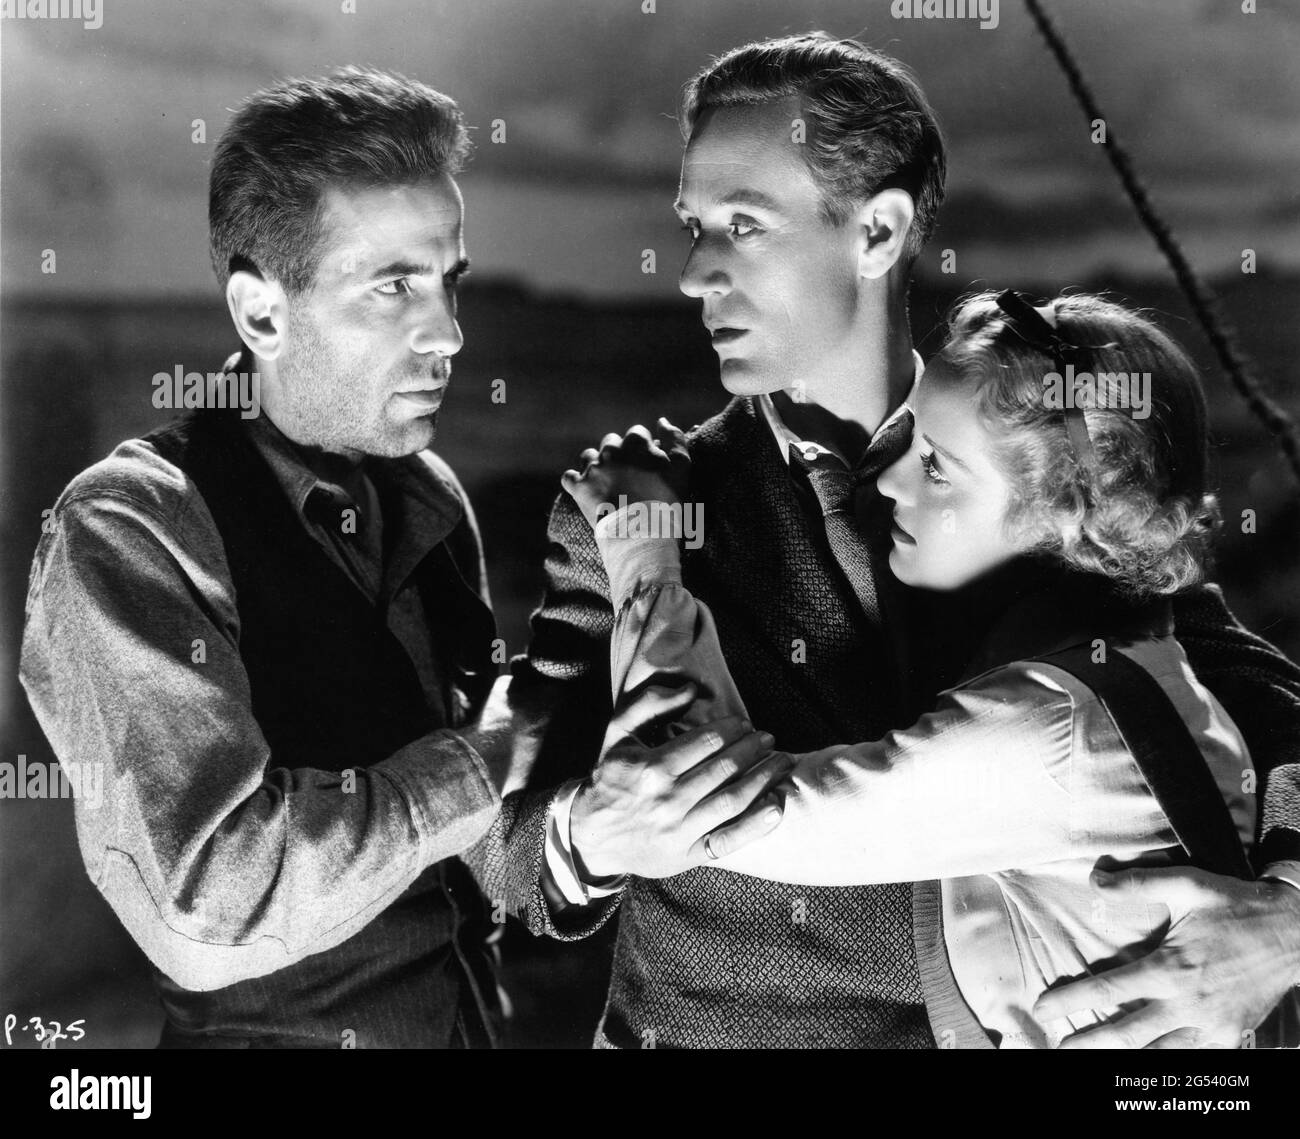 HUMPHREY BOGART LESLIE HOWARD and BETTE DAVIS in THE PETRIFIED FOREST 1936 director ARCHIE MAYO play Robert E. Sherwood screenplay Charles Kenyon and Delmer Daves Warner Bros. Stock Photo